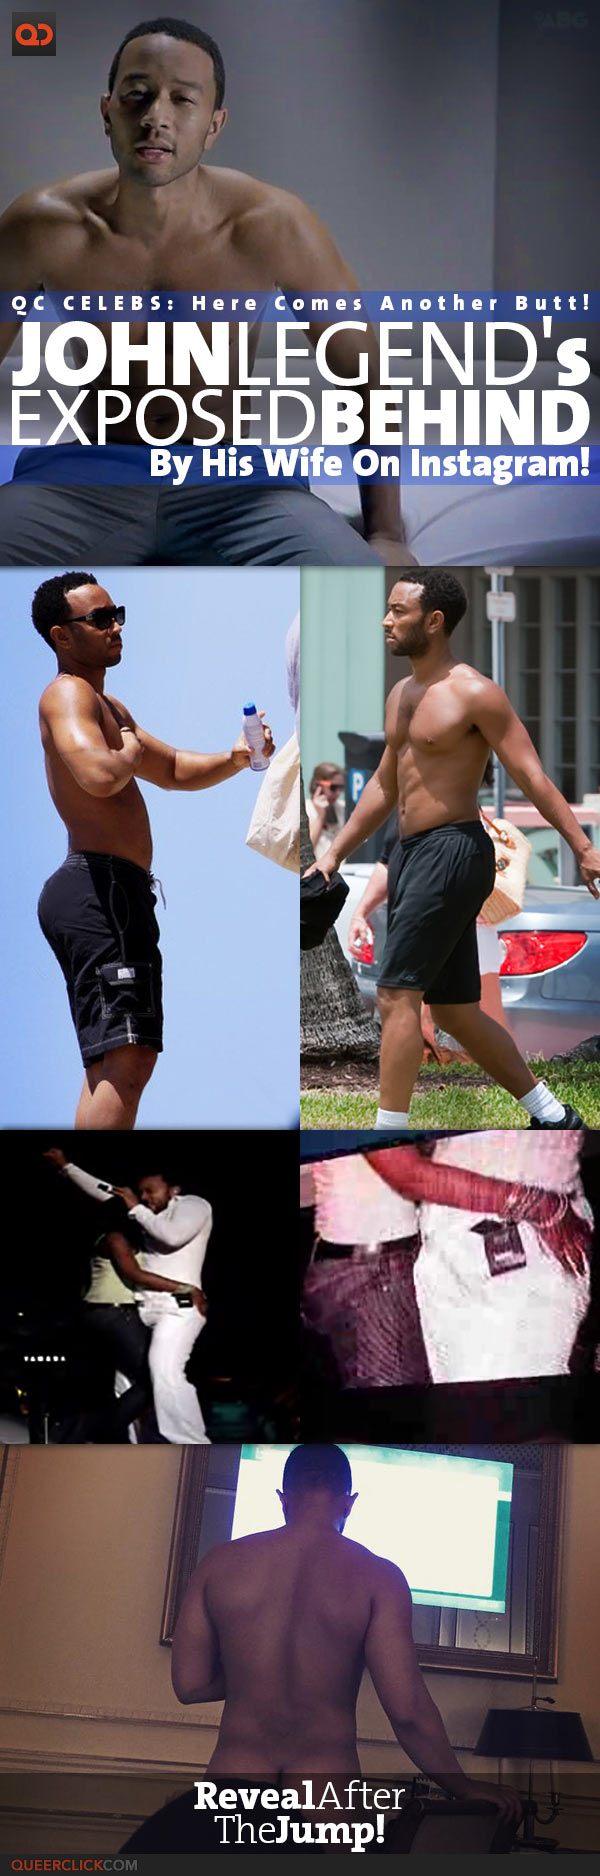 QC Celebs: Here Comes Another Butt! John Legend's Exposed Behind By His Wife On Instagram!